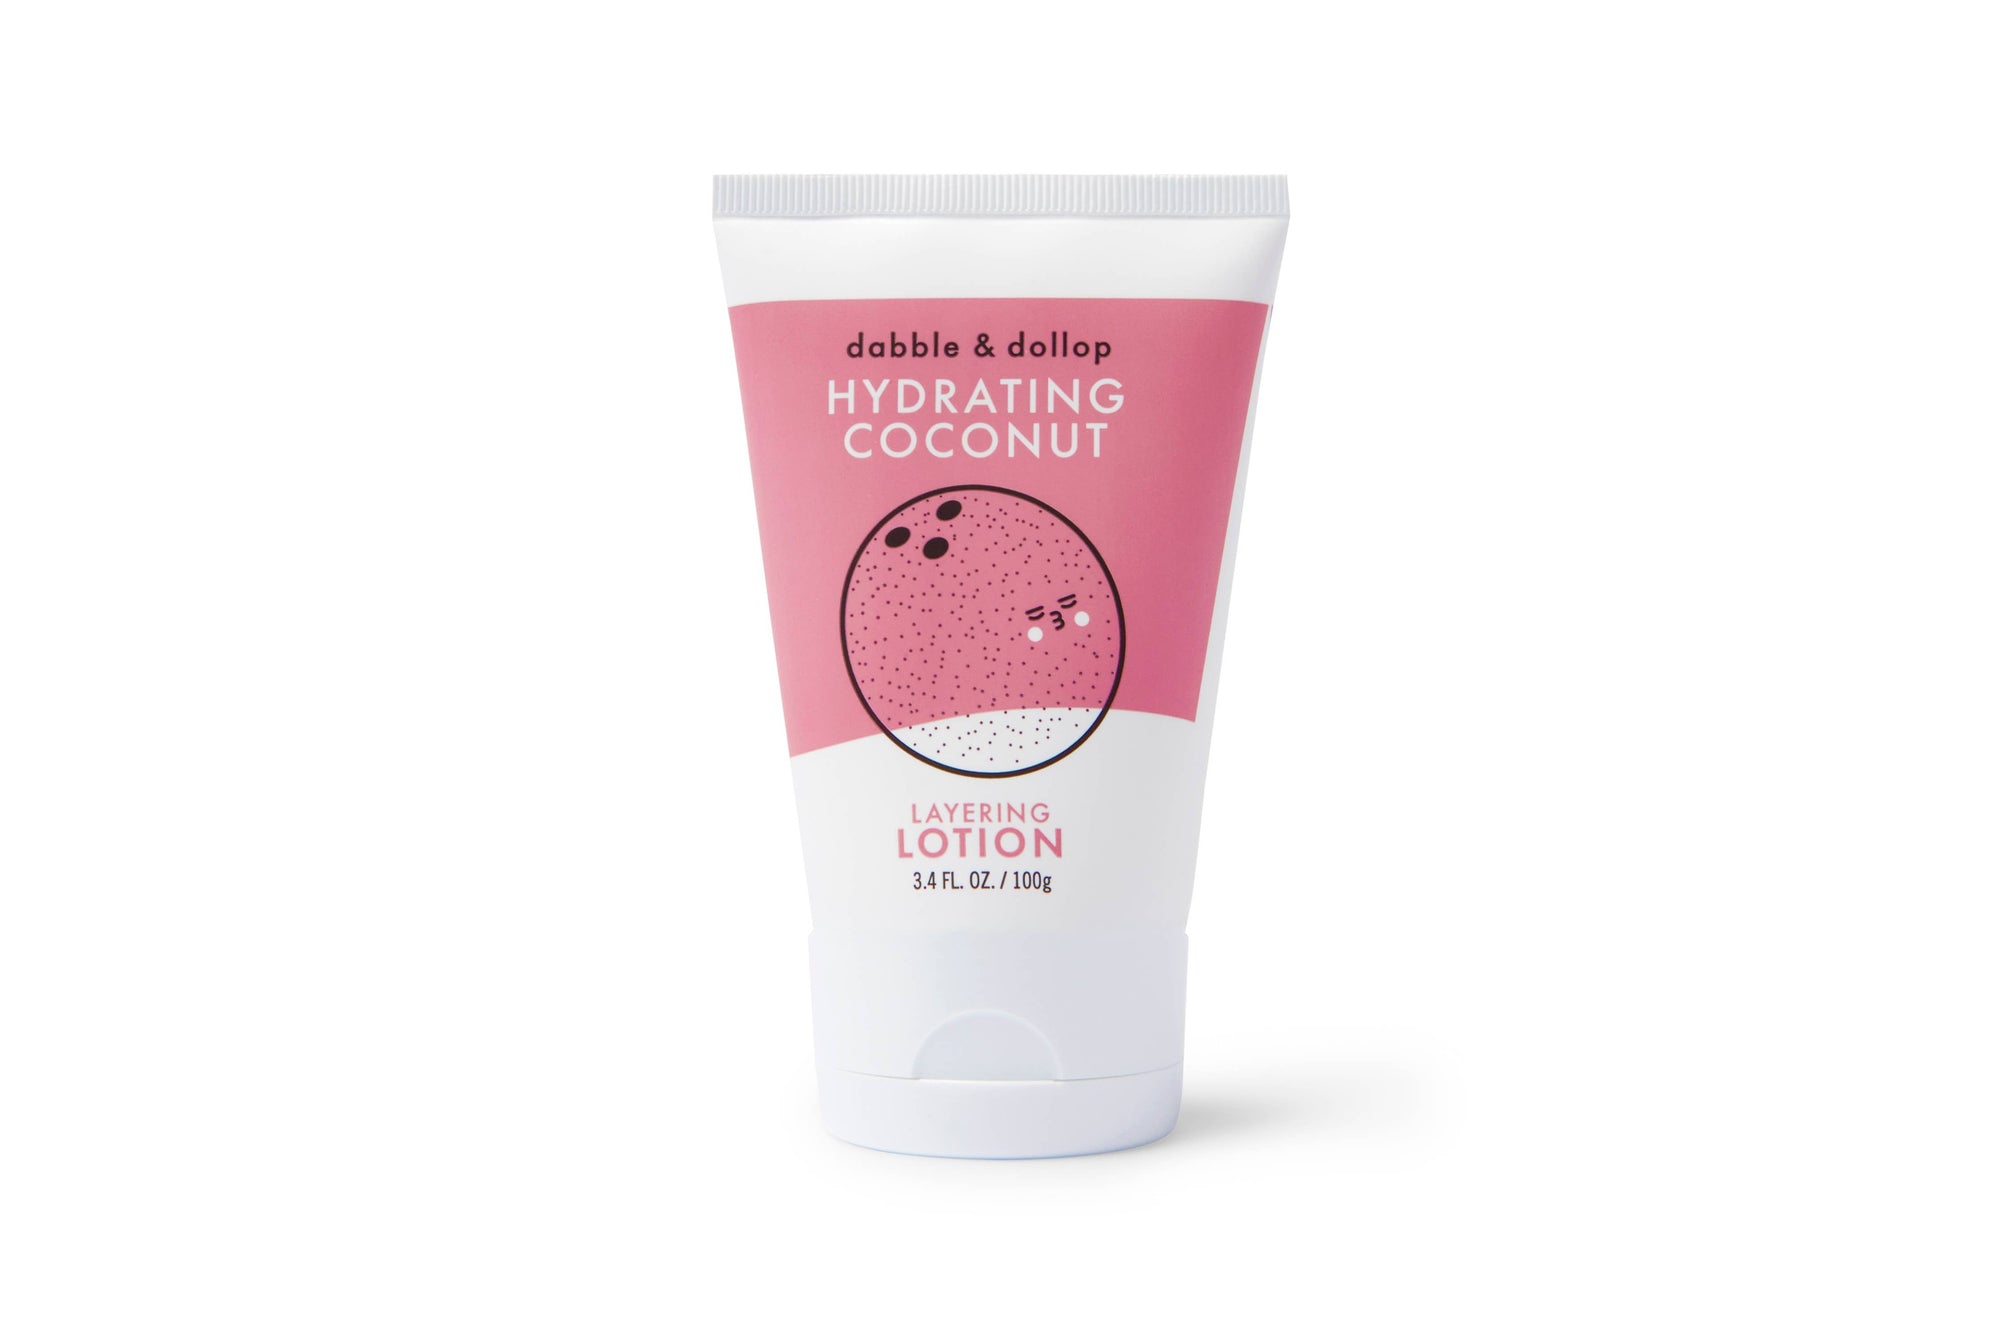 All-Natural Layering Lotions - Coconut